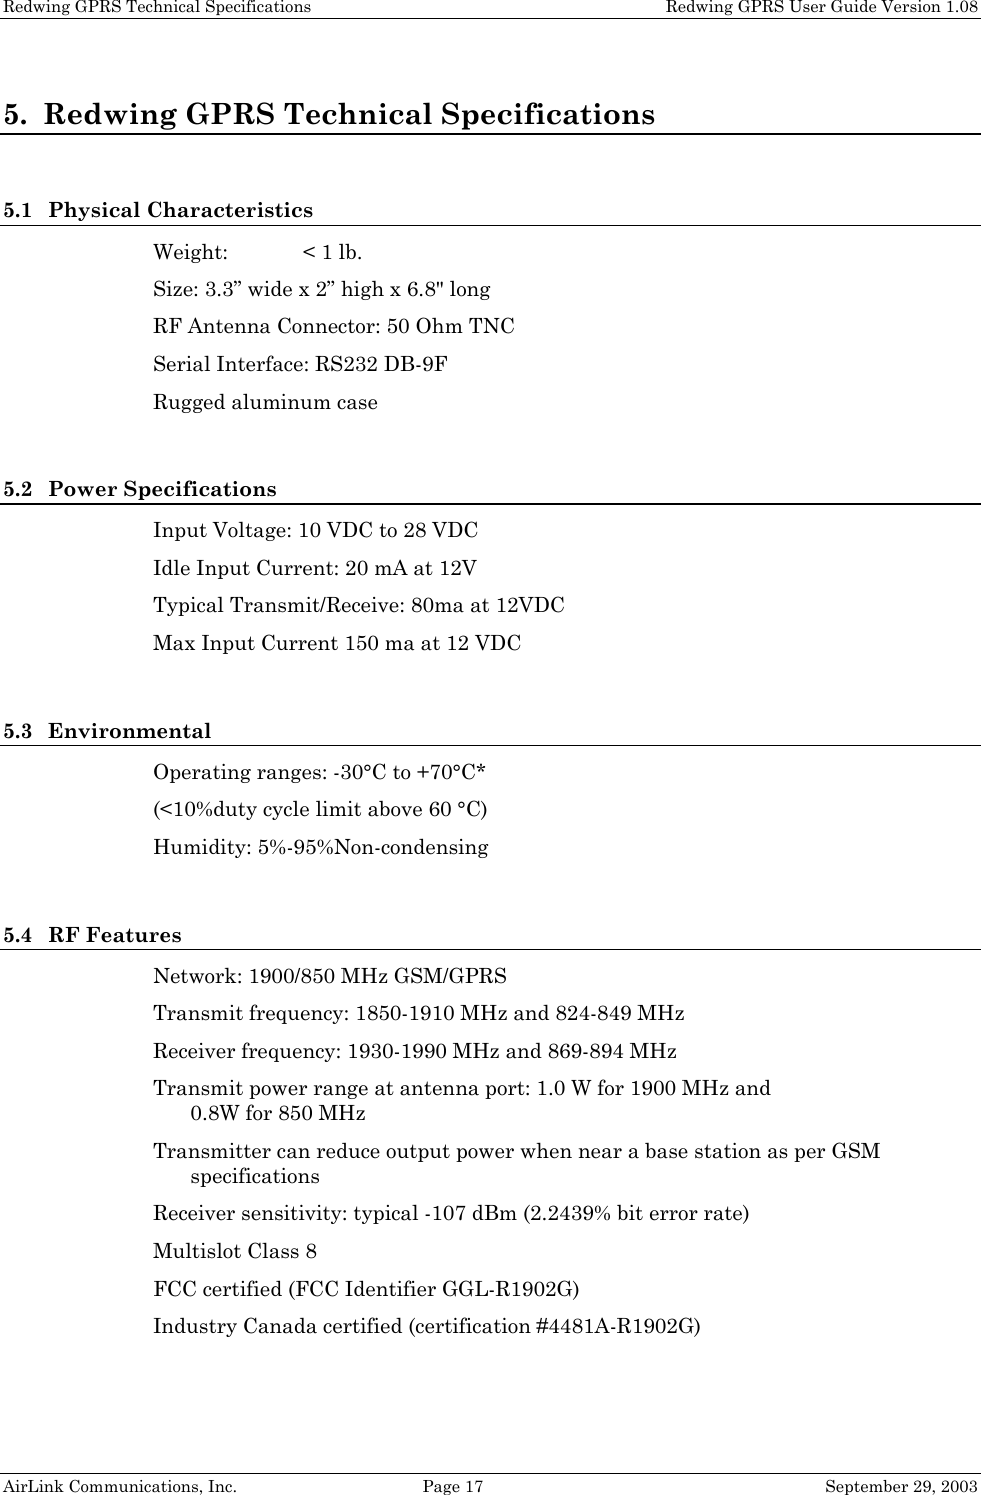 Redwing GPRS Technical Specifications   Redwing GPRS User Guide Version 1.08 AirLink Communications, Inc.  Page 17  September 29, 2003 5. Redwing GPRS Technical Specifications  5.1 Physical Characteristics Weight:  &lt; 1 lb. Size: 3.3” wide x 2” high x 6.8&quot; long  RF Antenna Connector: 50 Ohm TNC Serial Interface: RS232 DB-9F Rugged aluminum case  5.2 Power Specifications Input Voltage: 10 VDC to 28 VDC Idle Input Current: 20 mA at 12V Typical Transmit/Receive: 80ma at 12VDC Max Input Current 150 ma at 12 VDC  5.3 Environmental Operating ranges: -30°C to +70°C* (&lt;10%duty cycle limit above 60 °C) Humidity: 5%-95%Non-condensing  5.4 RF Features Network: 1900/850 MHz GSM/GPRS Transmit frequency: 1850-1910 MHz and 824-849 MHz Receiver frequency: 1930-1990 MHz and 869-894 MHz Transmit power range at antenna port: 1.0 W for 1900 MHz and  0.8W for 850 MHz Transmitter can reduce output power when near a base station as per GSM specifications Receiver sensitivity: typical -107 dBm (2.2439% bit error rate) Multislot Class 8 FCC certified (FCC Identifier GGL-R1902G) Industry Canada certified (certification #4481A-R1902G) 